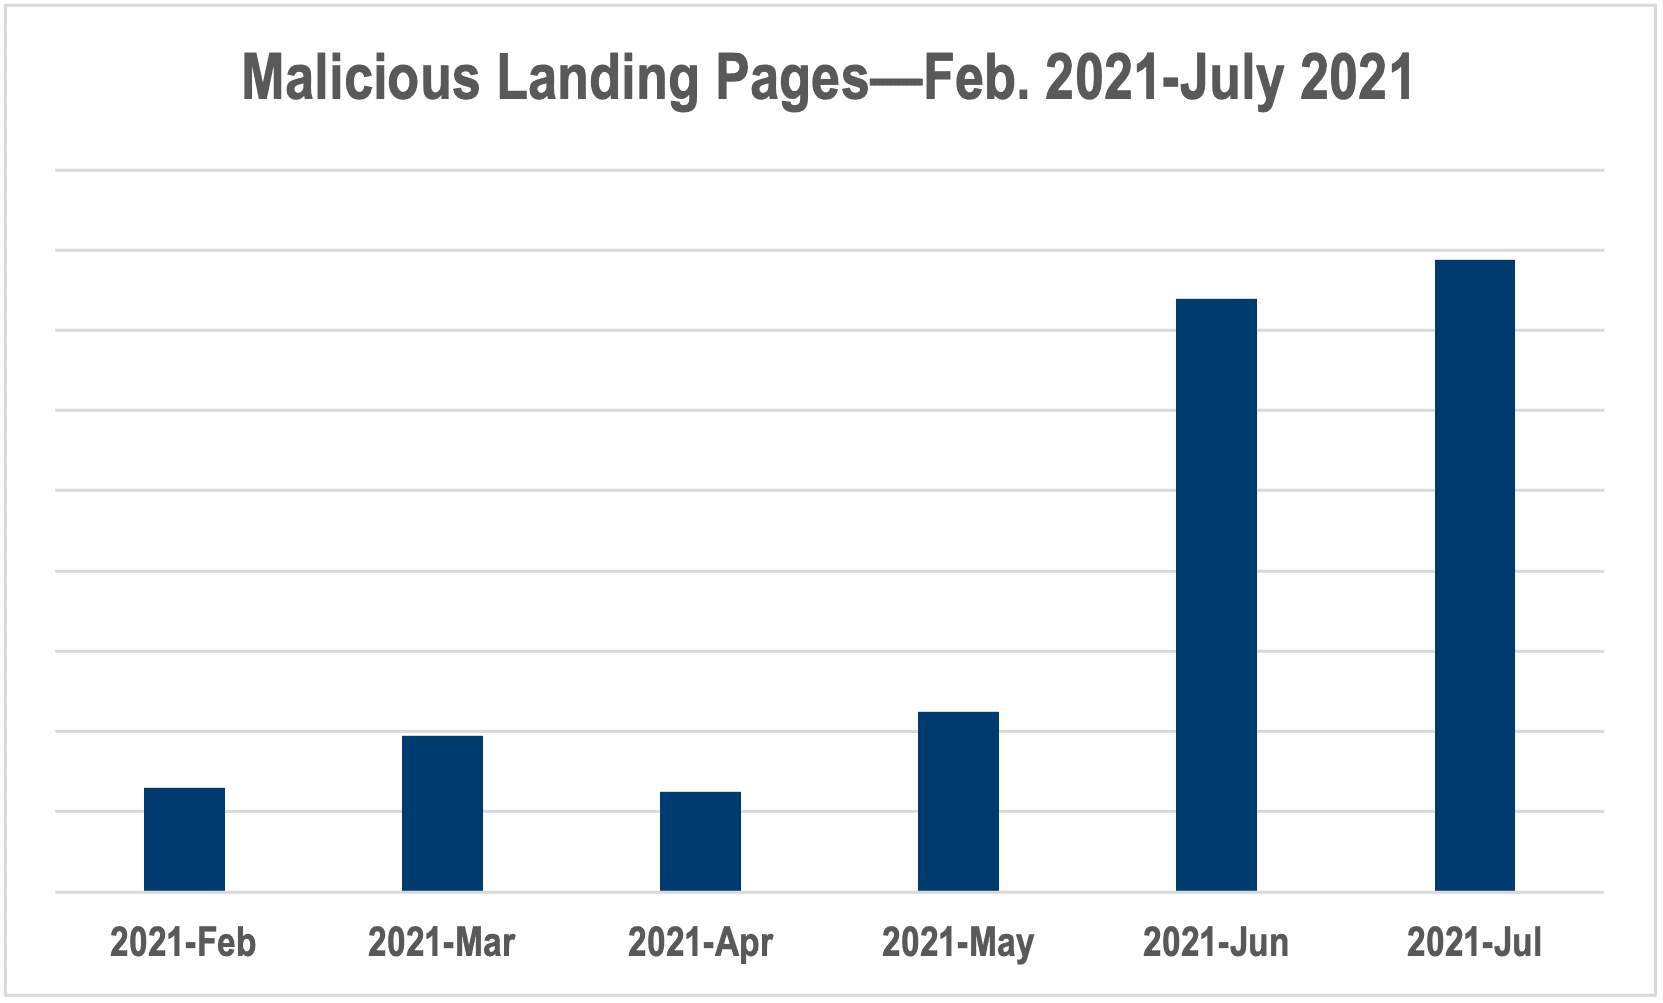 Malicious landing pages 2021